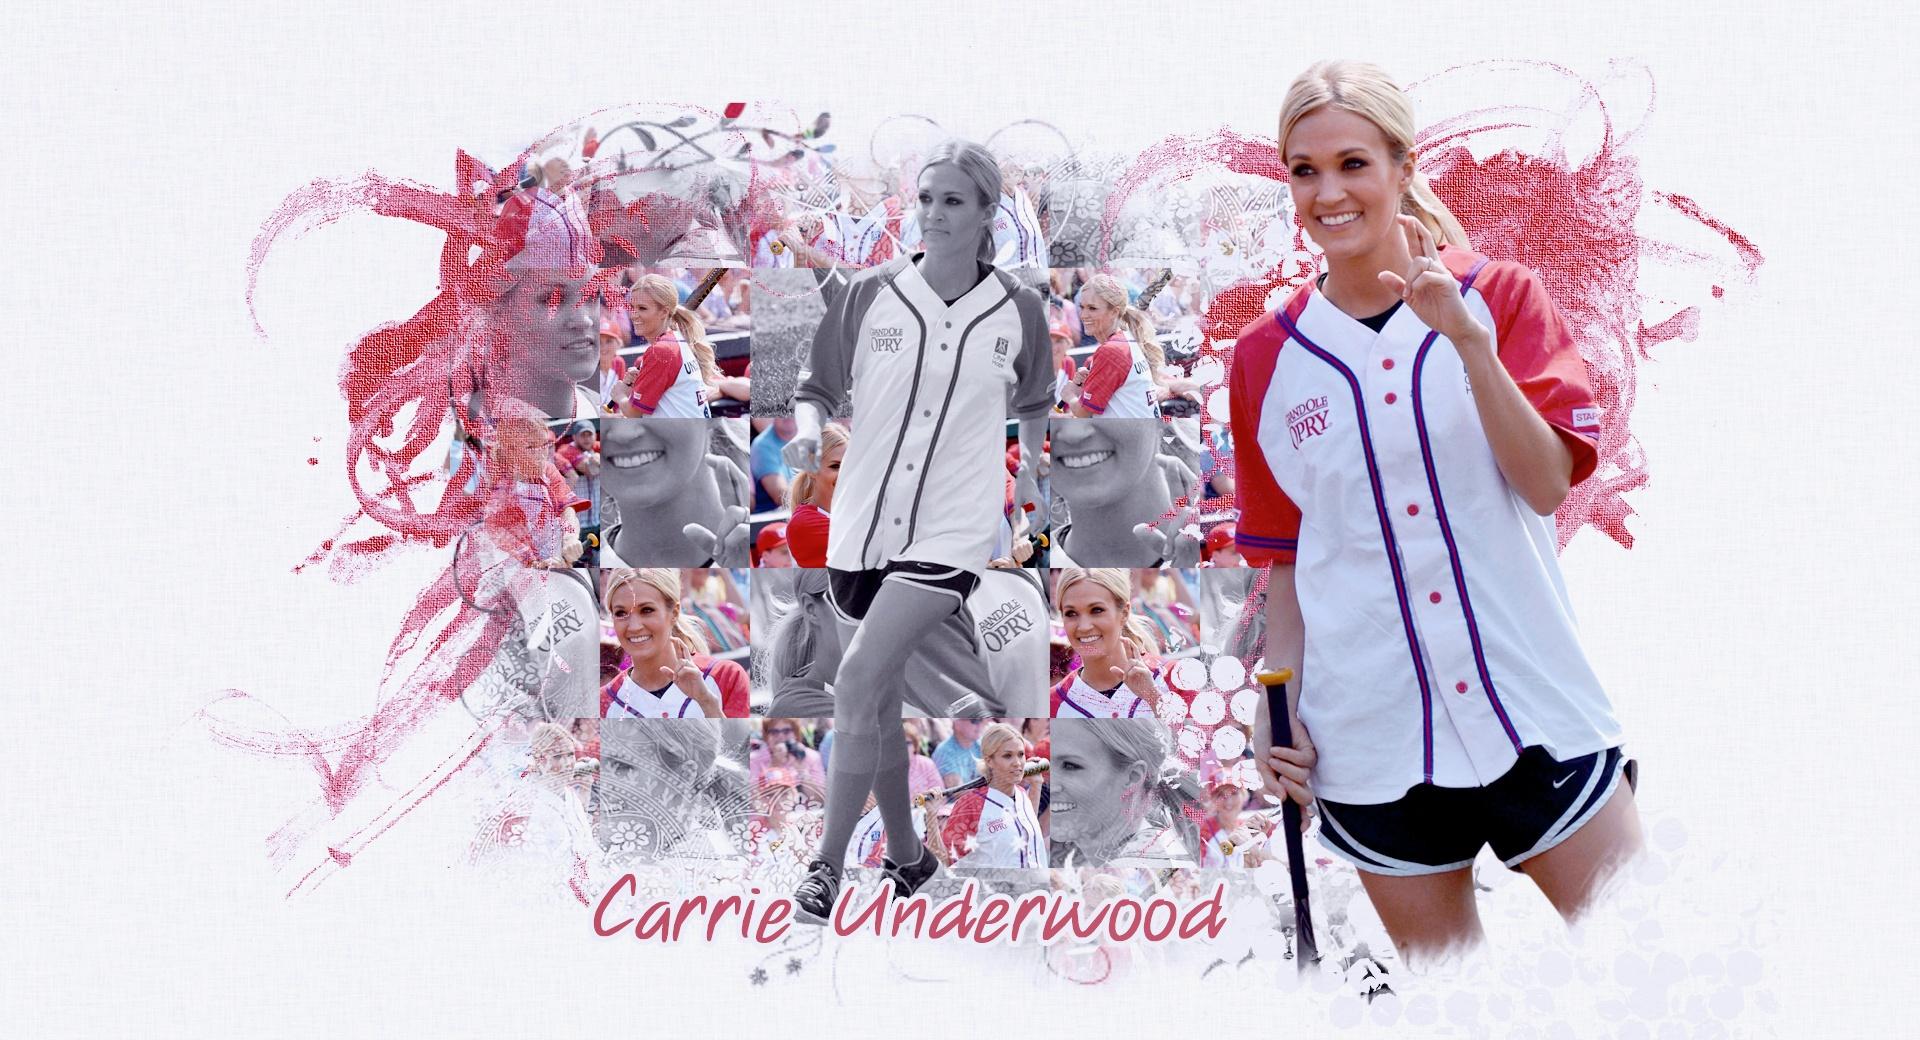 Carrie Underwood Playing Softball wallpapers HD quality